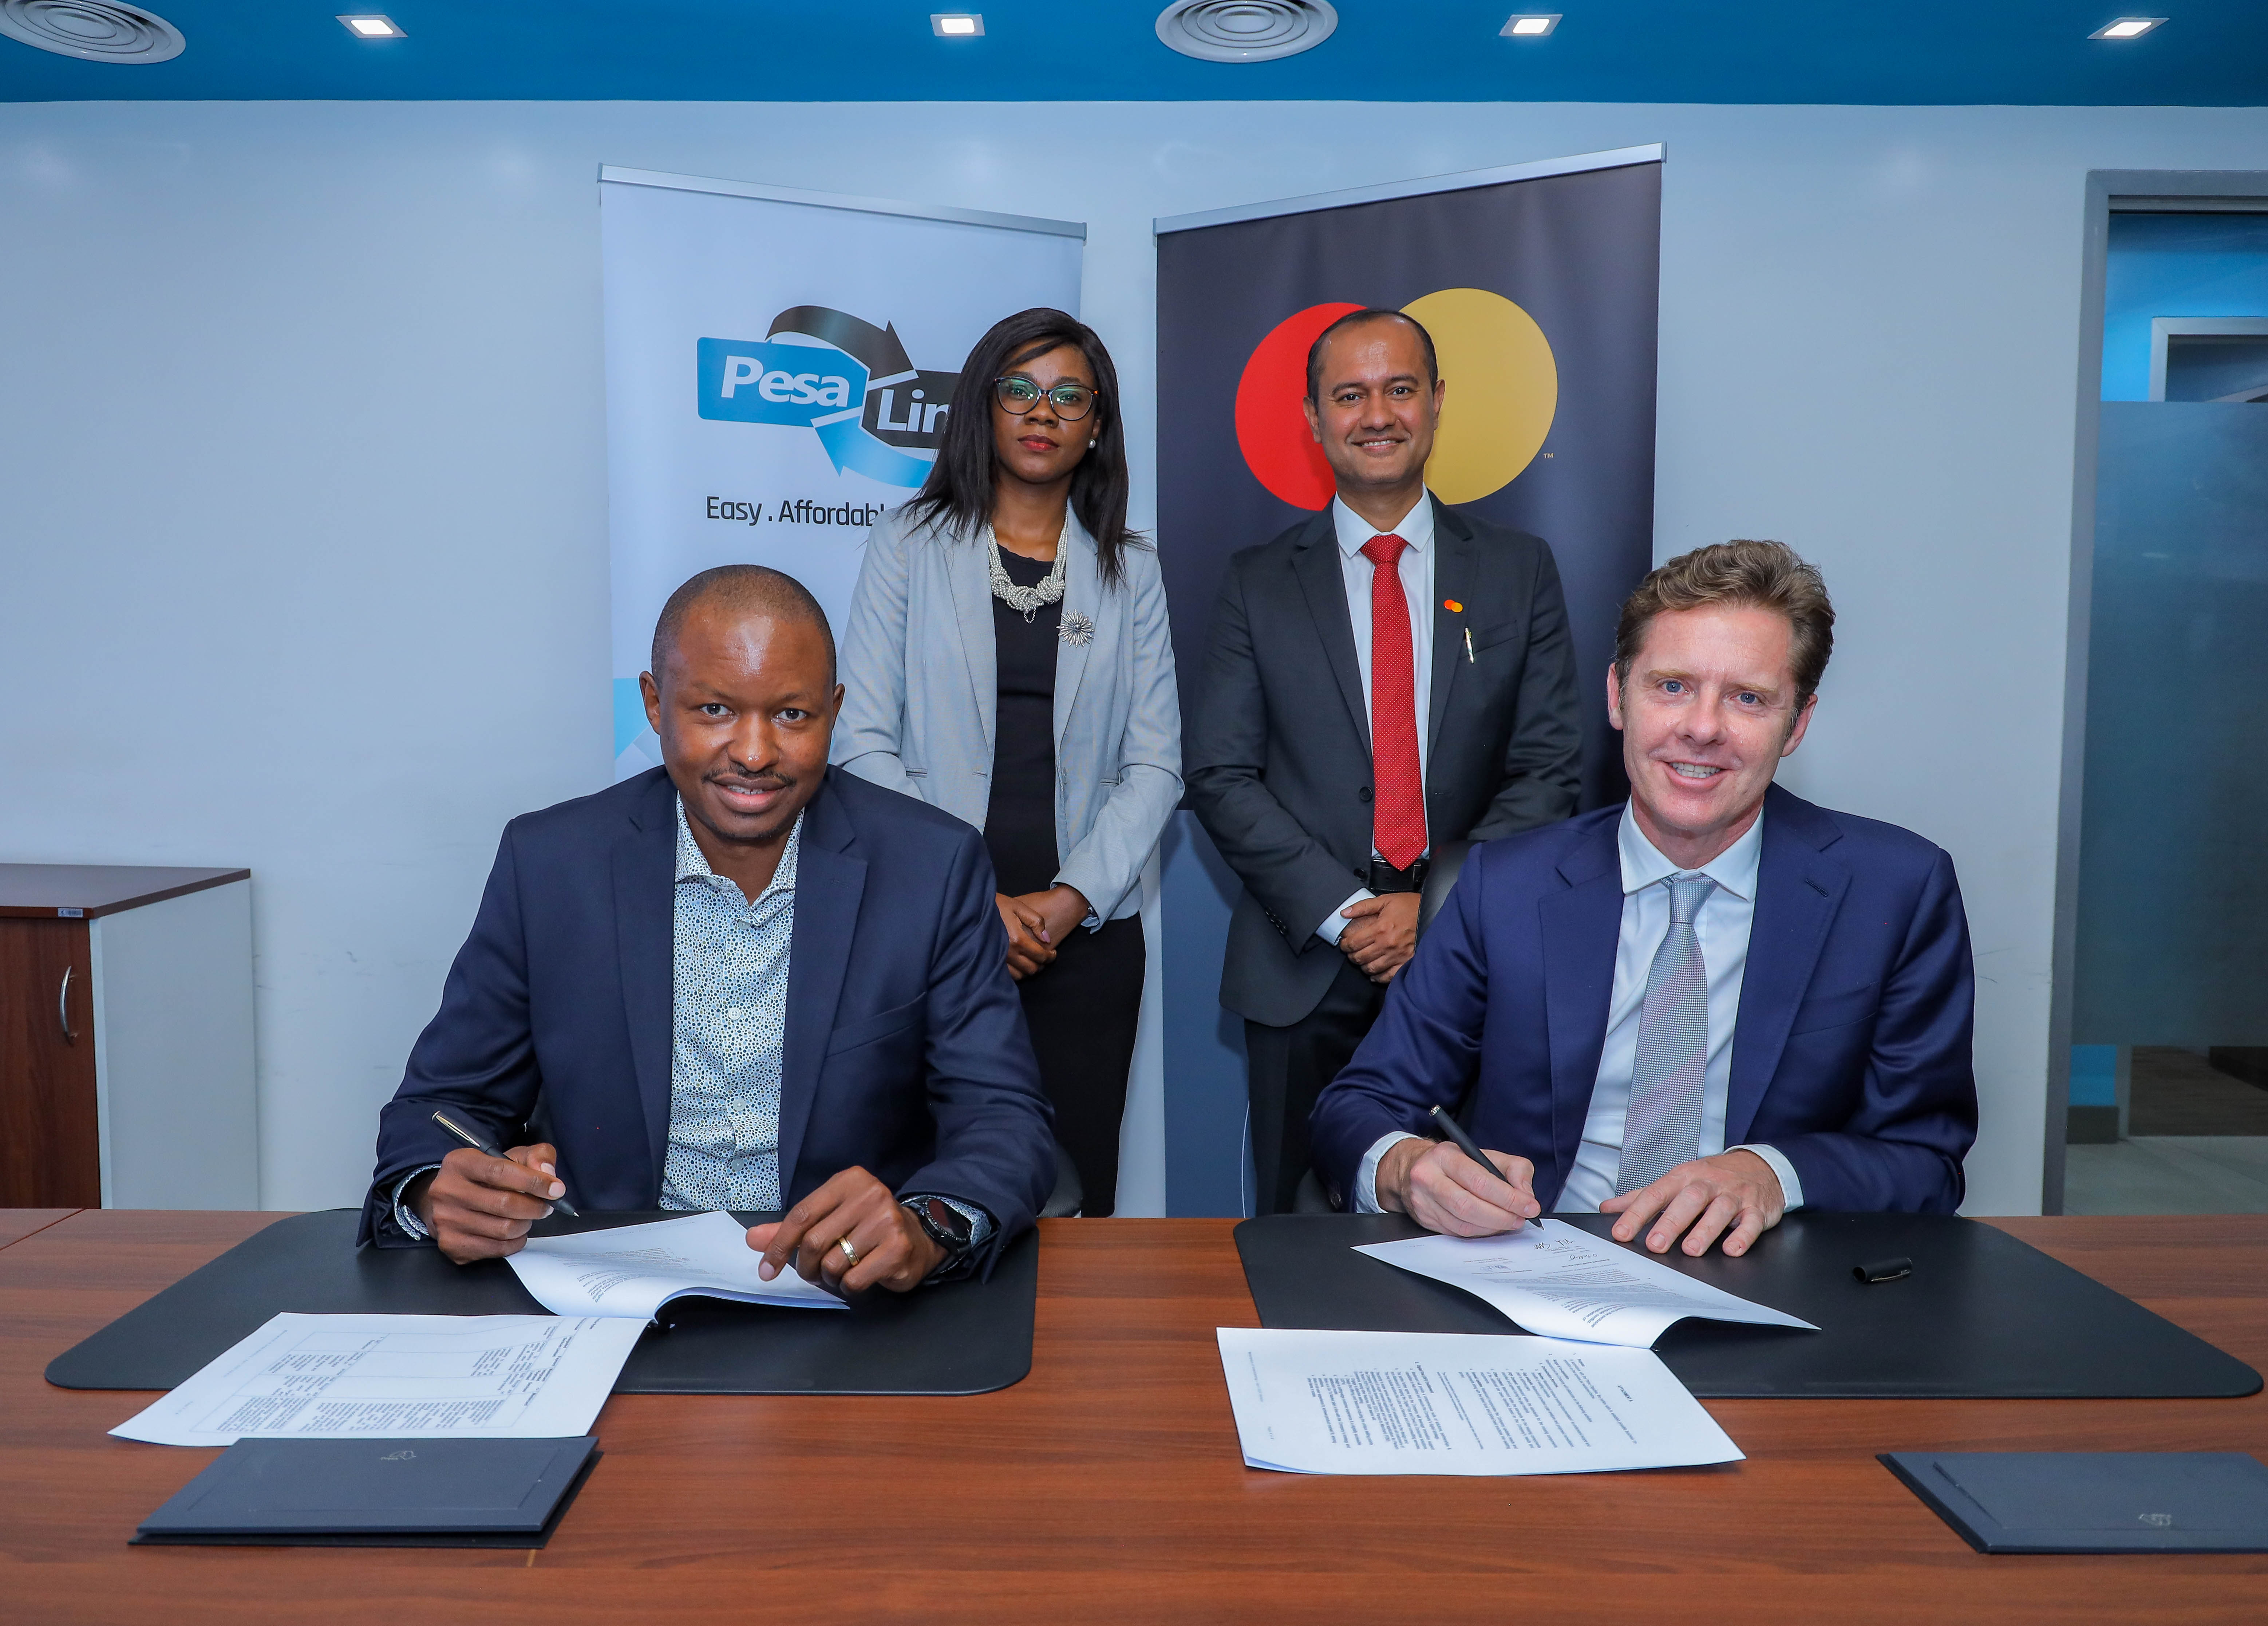 Gituku Kirika, CEO of PesaLink (front left) and Mark Elliott, Division President for Mastercard, Sub-Saharan Africa, Mastercard (front right) sign a Memorandum of Understanding to create innovative, digital-first payment solutions designed to boost the adoption and usage of digital payments and accelerate Kenya’s transition to a cash-lite economy. They are joined by Chief Strategy and Transformation Officer, IPSL, Plounne Oyunge (back left) and Shehryar Ali, Country Manager for Mastercard, East Africa (back right).